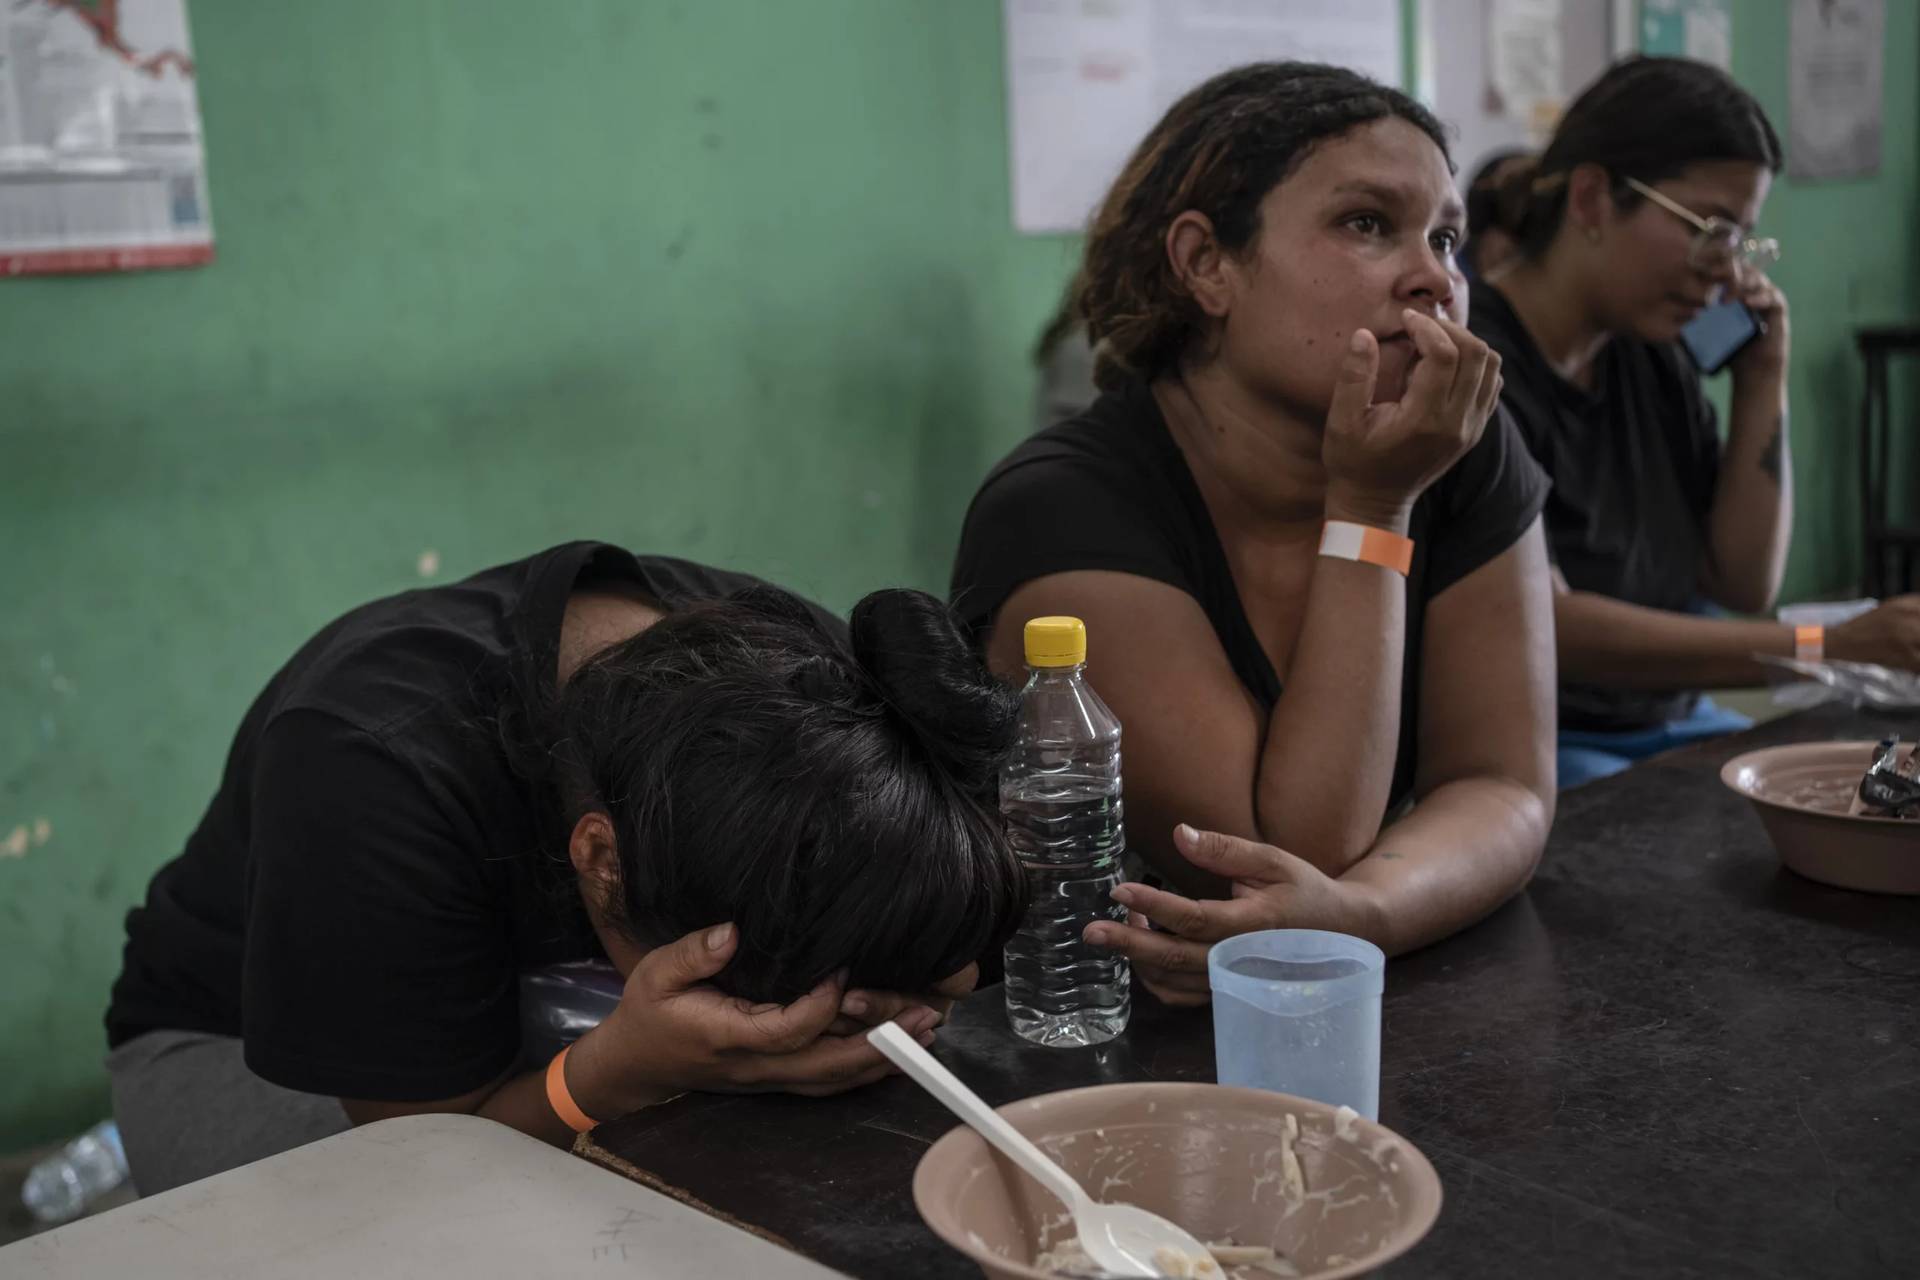 Yeneska Garcia, a Venezuelan migrant, cries into her hands as she eats at the Peace Oasis of the Holy Spirit Amparito shelter in Villahermosa, Mexico, Friday, June 7, 2024. Since the 23-year-old fled Venezuela in January, she trekked days through the jungles of The Darien Gap, narrowly survived being kidnapped by Mexican cartels and waited months for an asylum appointment with the U.S. that never came through. (Credit: Felix Marquez/AP.)